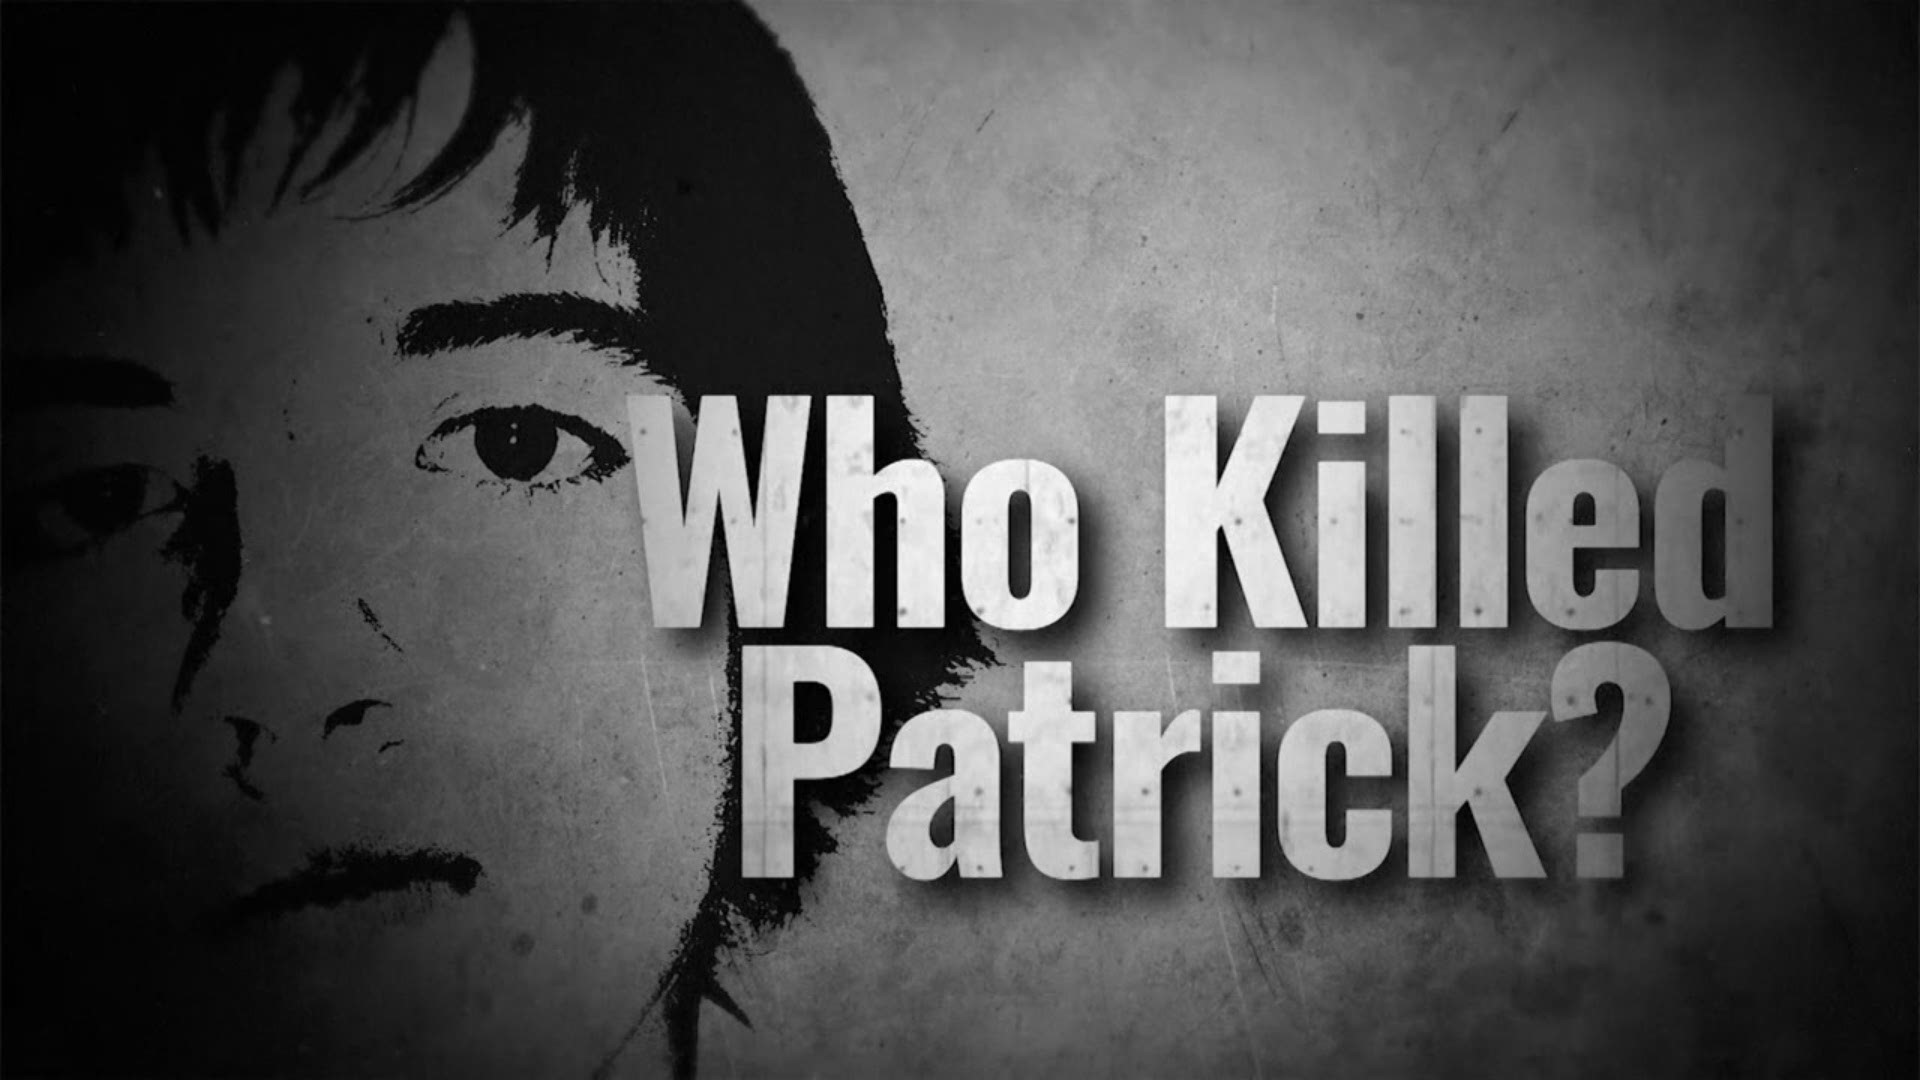 He was killed two weeks shy of his 19th birthday. Six years later, one question remains: Who killed Patrick Carver?